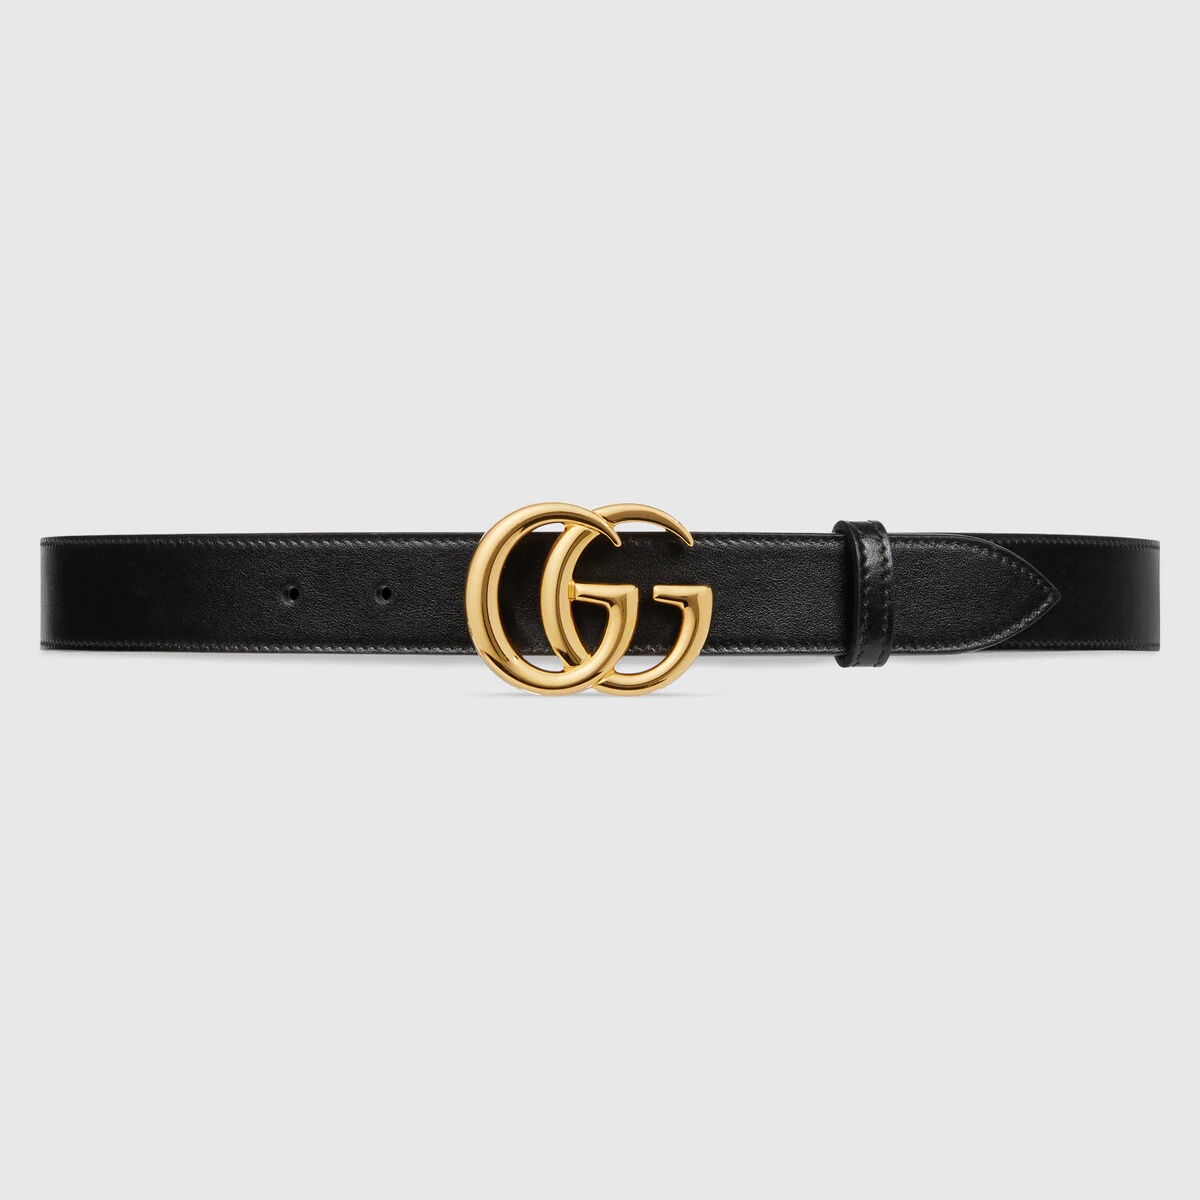 GG Marmont leather belt with shiny buckle - 1